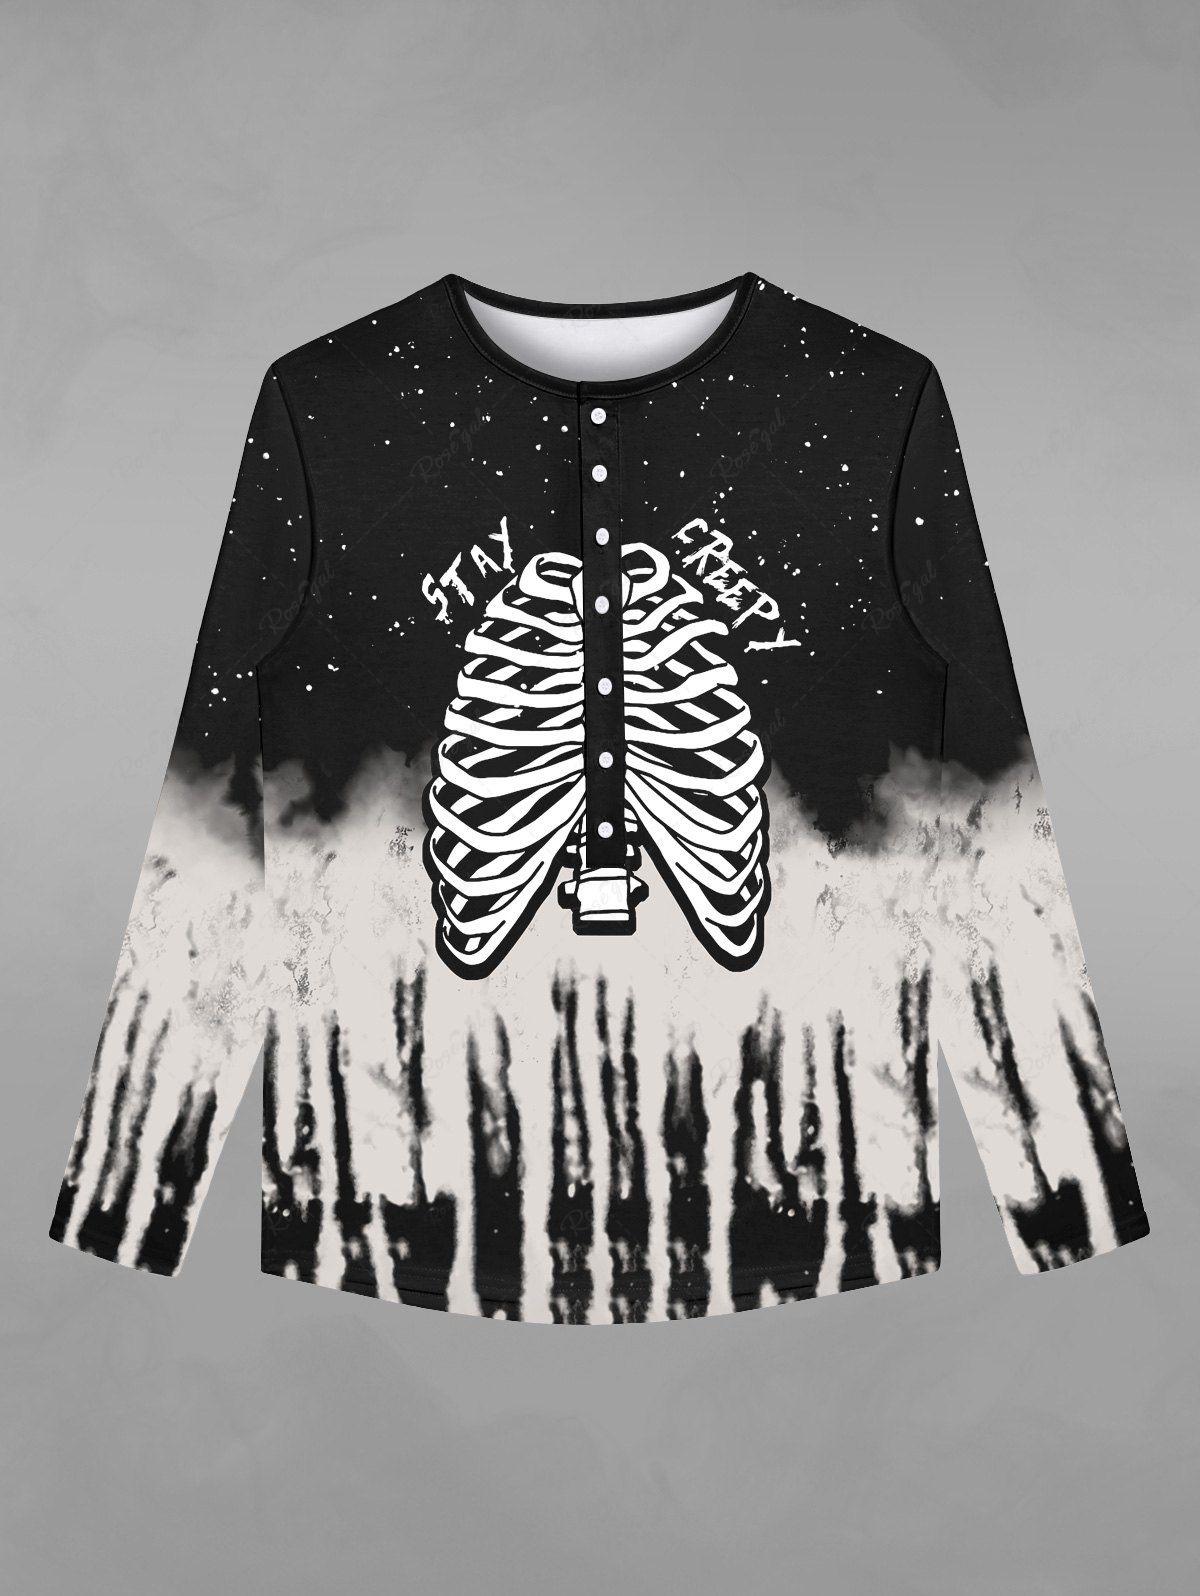 Discount Gothic Galaxy Skeleton Distressed Print Buttons Halloween T-shirt For Men  